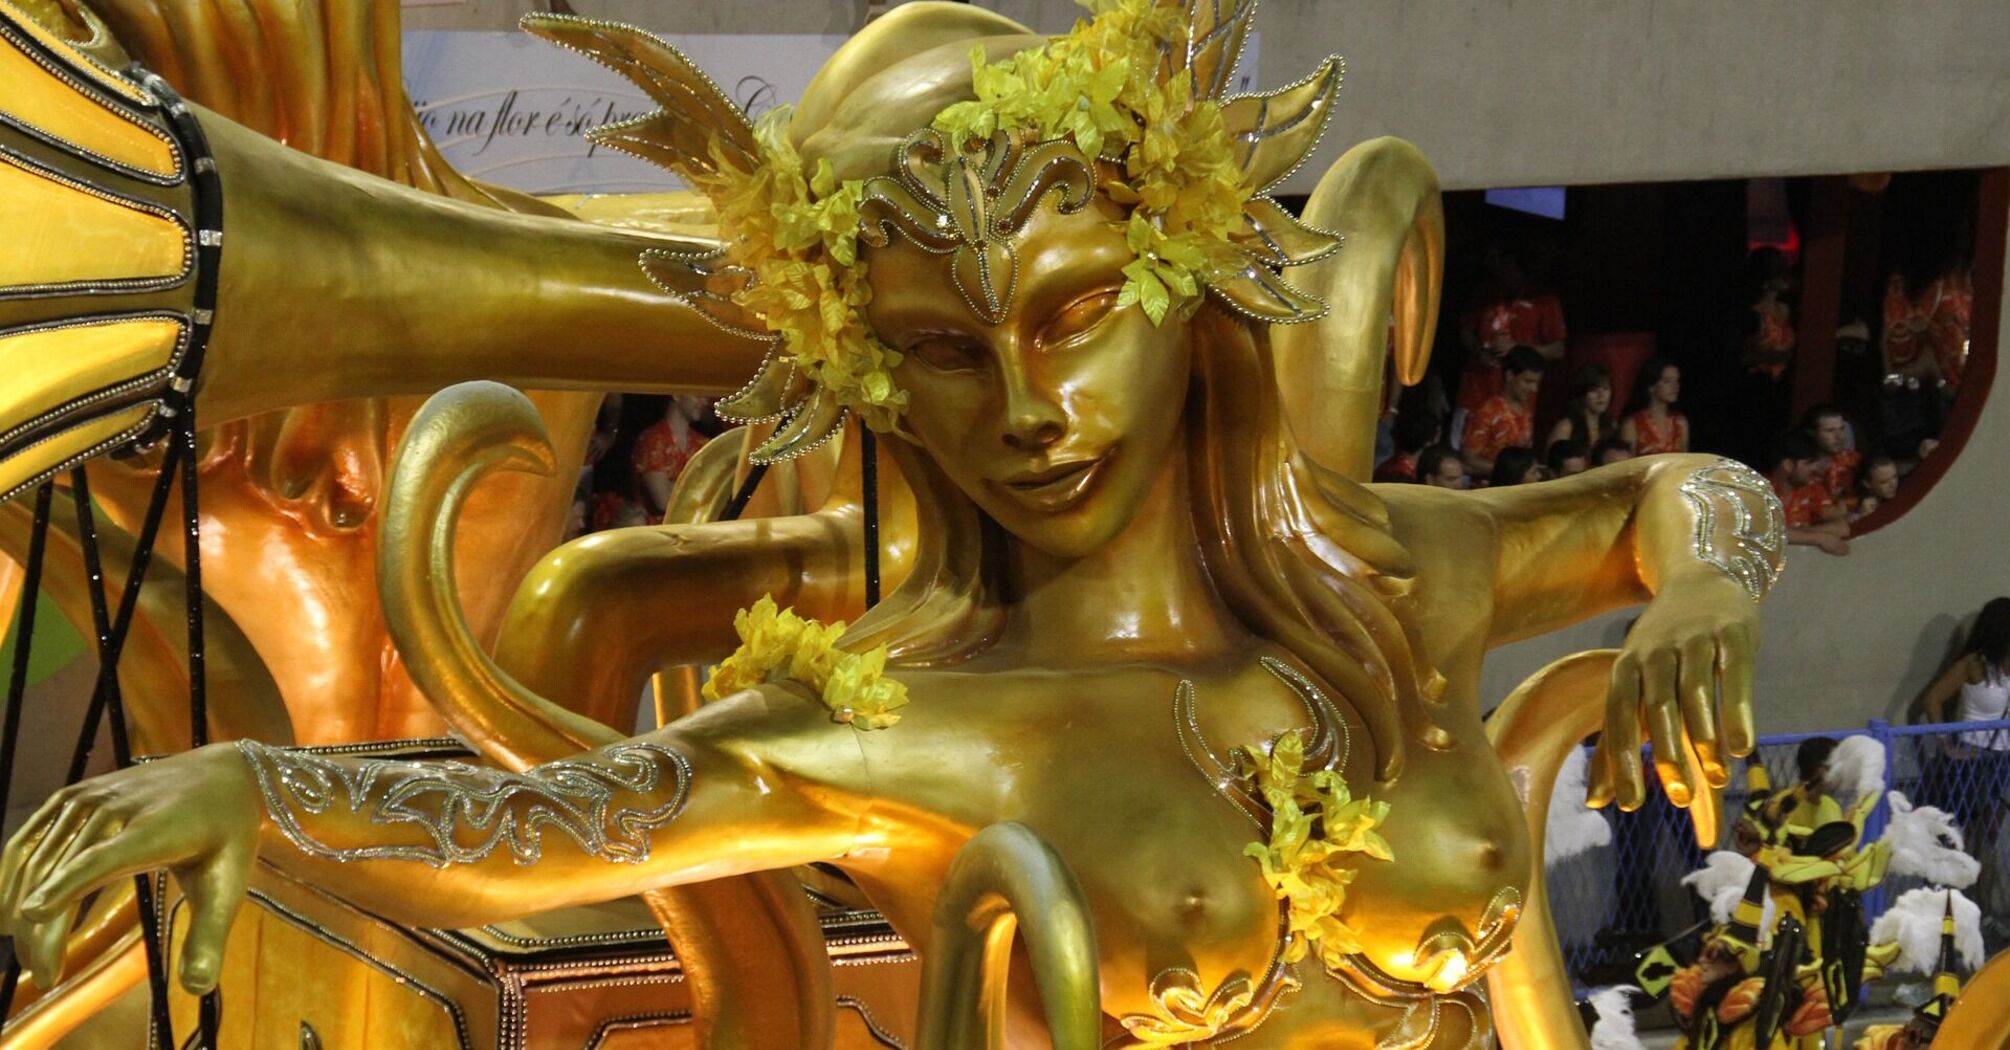 A golden statue of a mythical figure with outstretched arms, adorned with yellow floral decorations